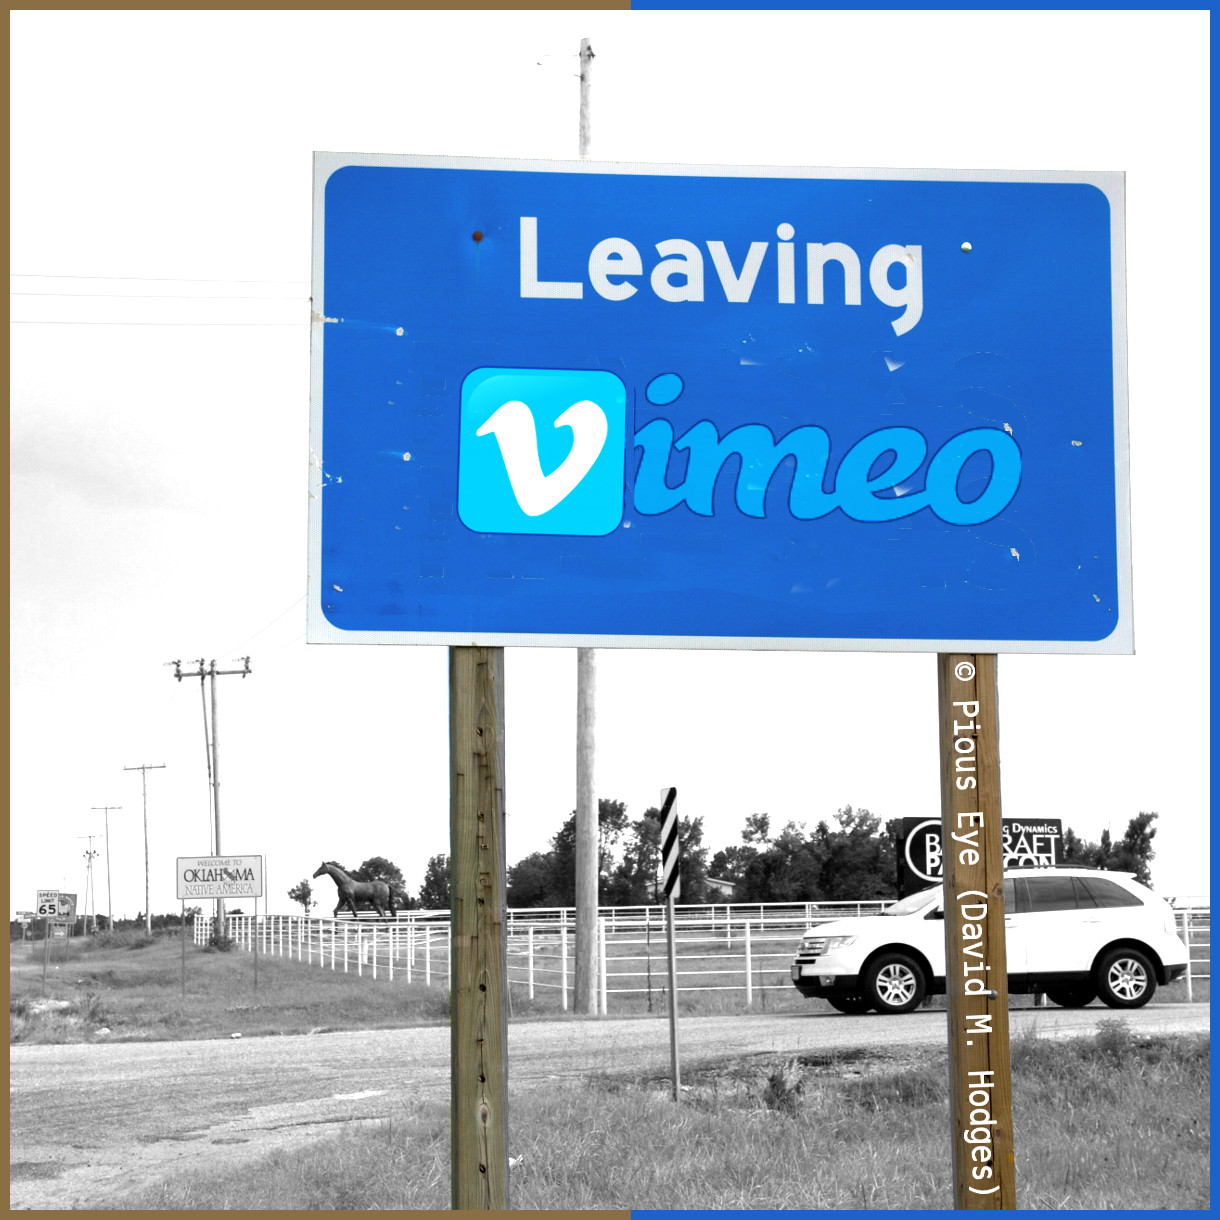 My Sad Farewell to Vimeo, with Protest and Reflection Suggestions